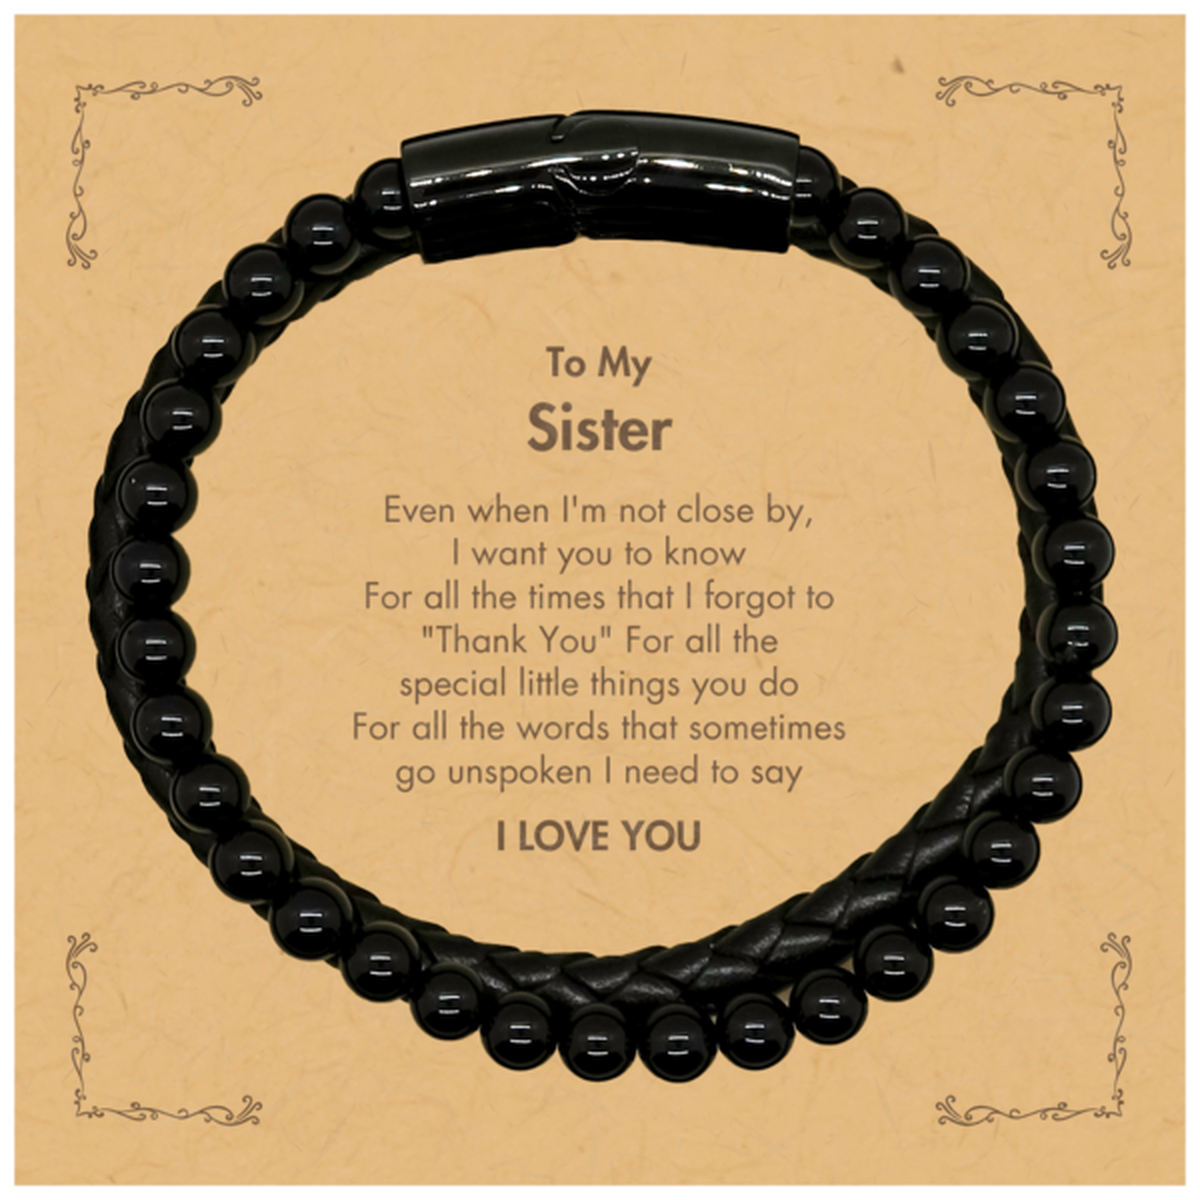 Thank You Gifts for Sister, Keepsake Stone Leather Bracelets Gifts for Sister Birthday Mother's day Father's Day Sister For all the words That sometimes go unspoken I need to say I LOVE YOU